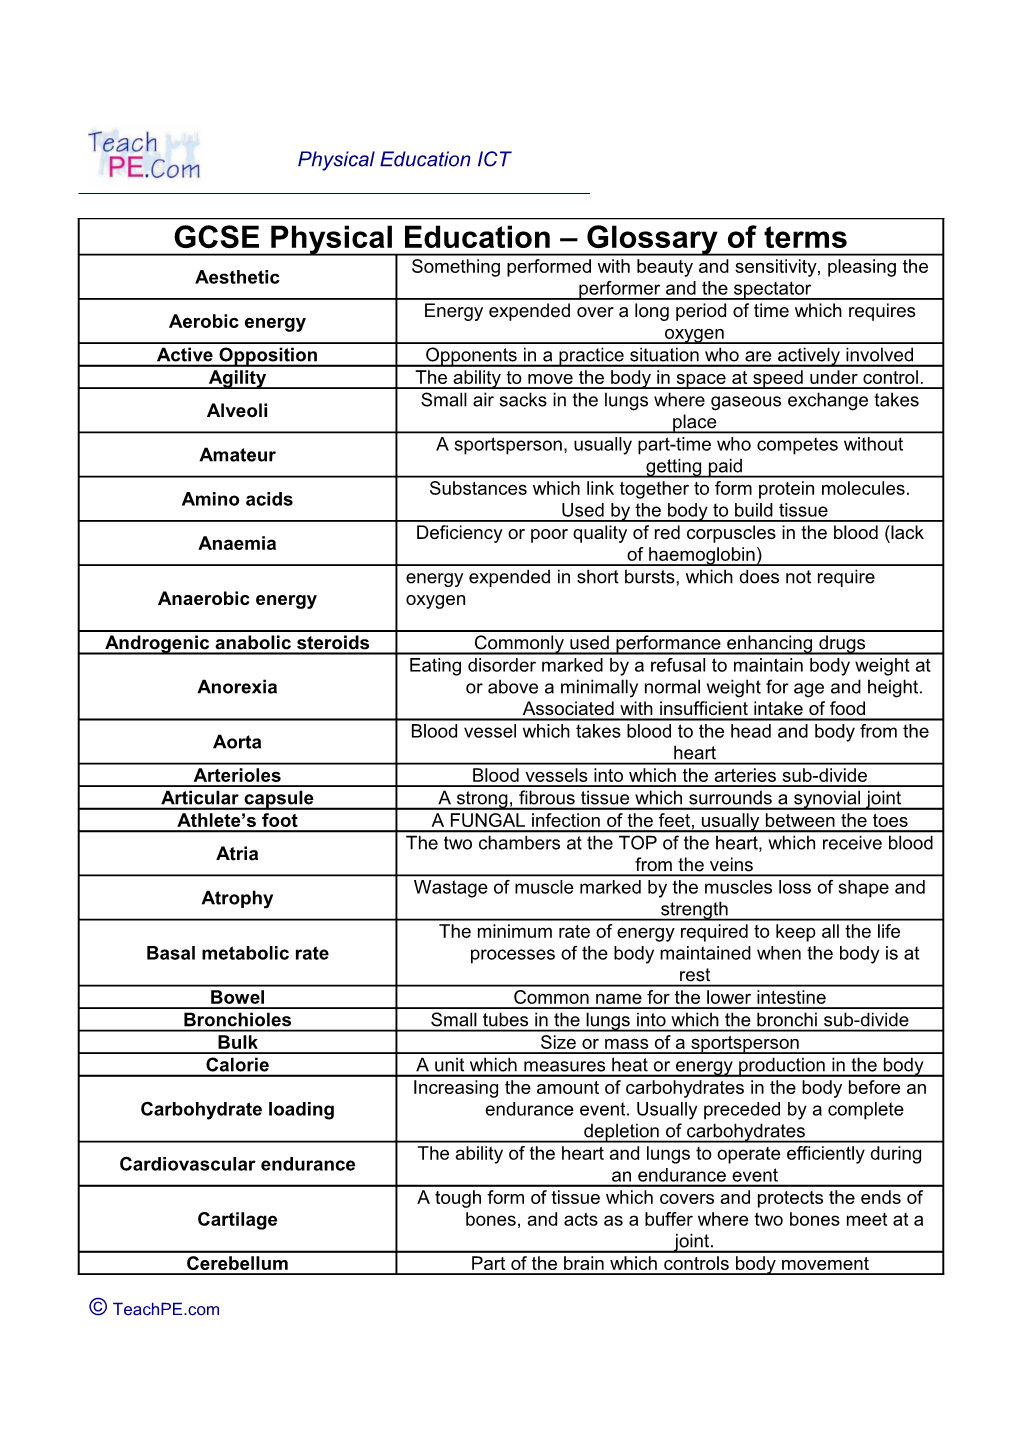 GCSE Physical Education Glossary of Terms